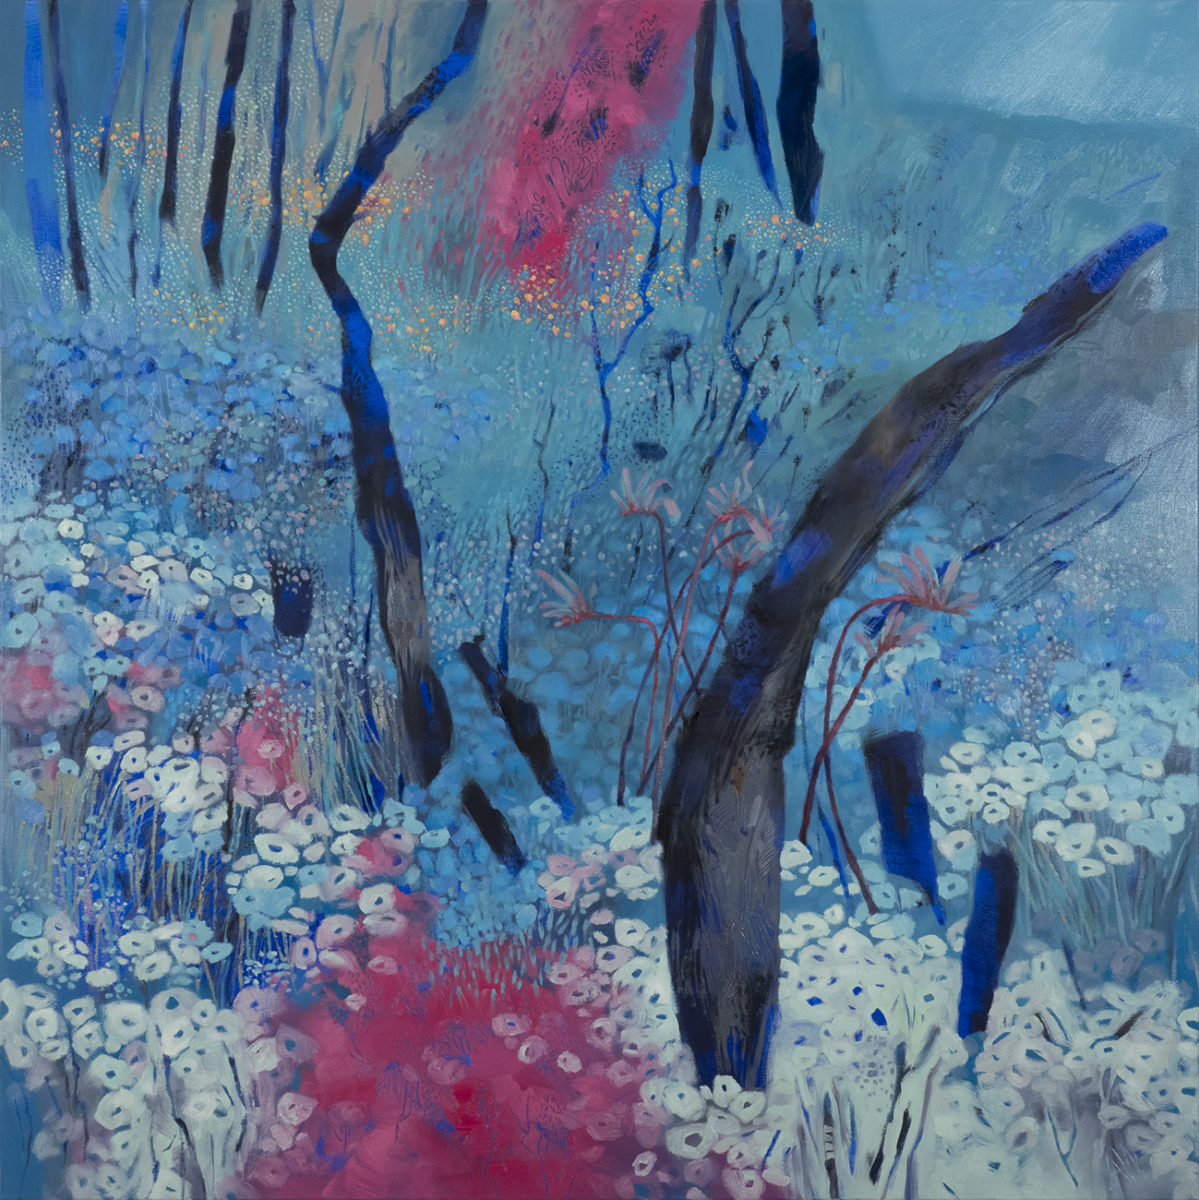 Blue spring and paper daisies 2022 | Adrienne Williams | Oil on canvas | 100 x 100 cm | SOLD